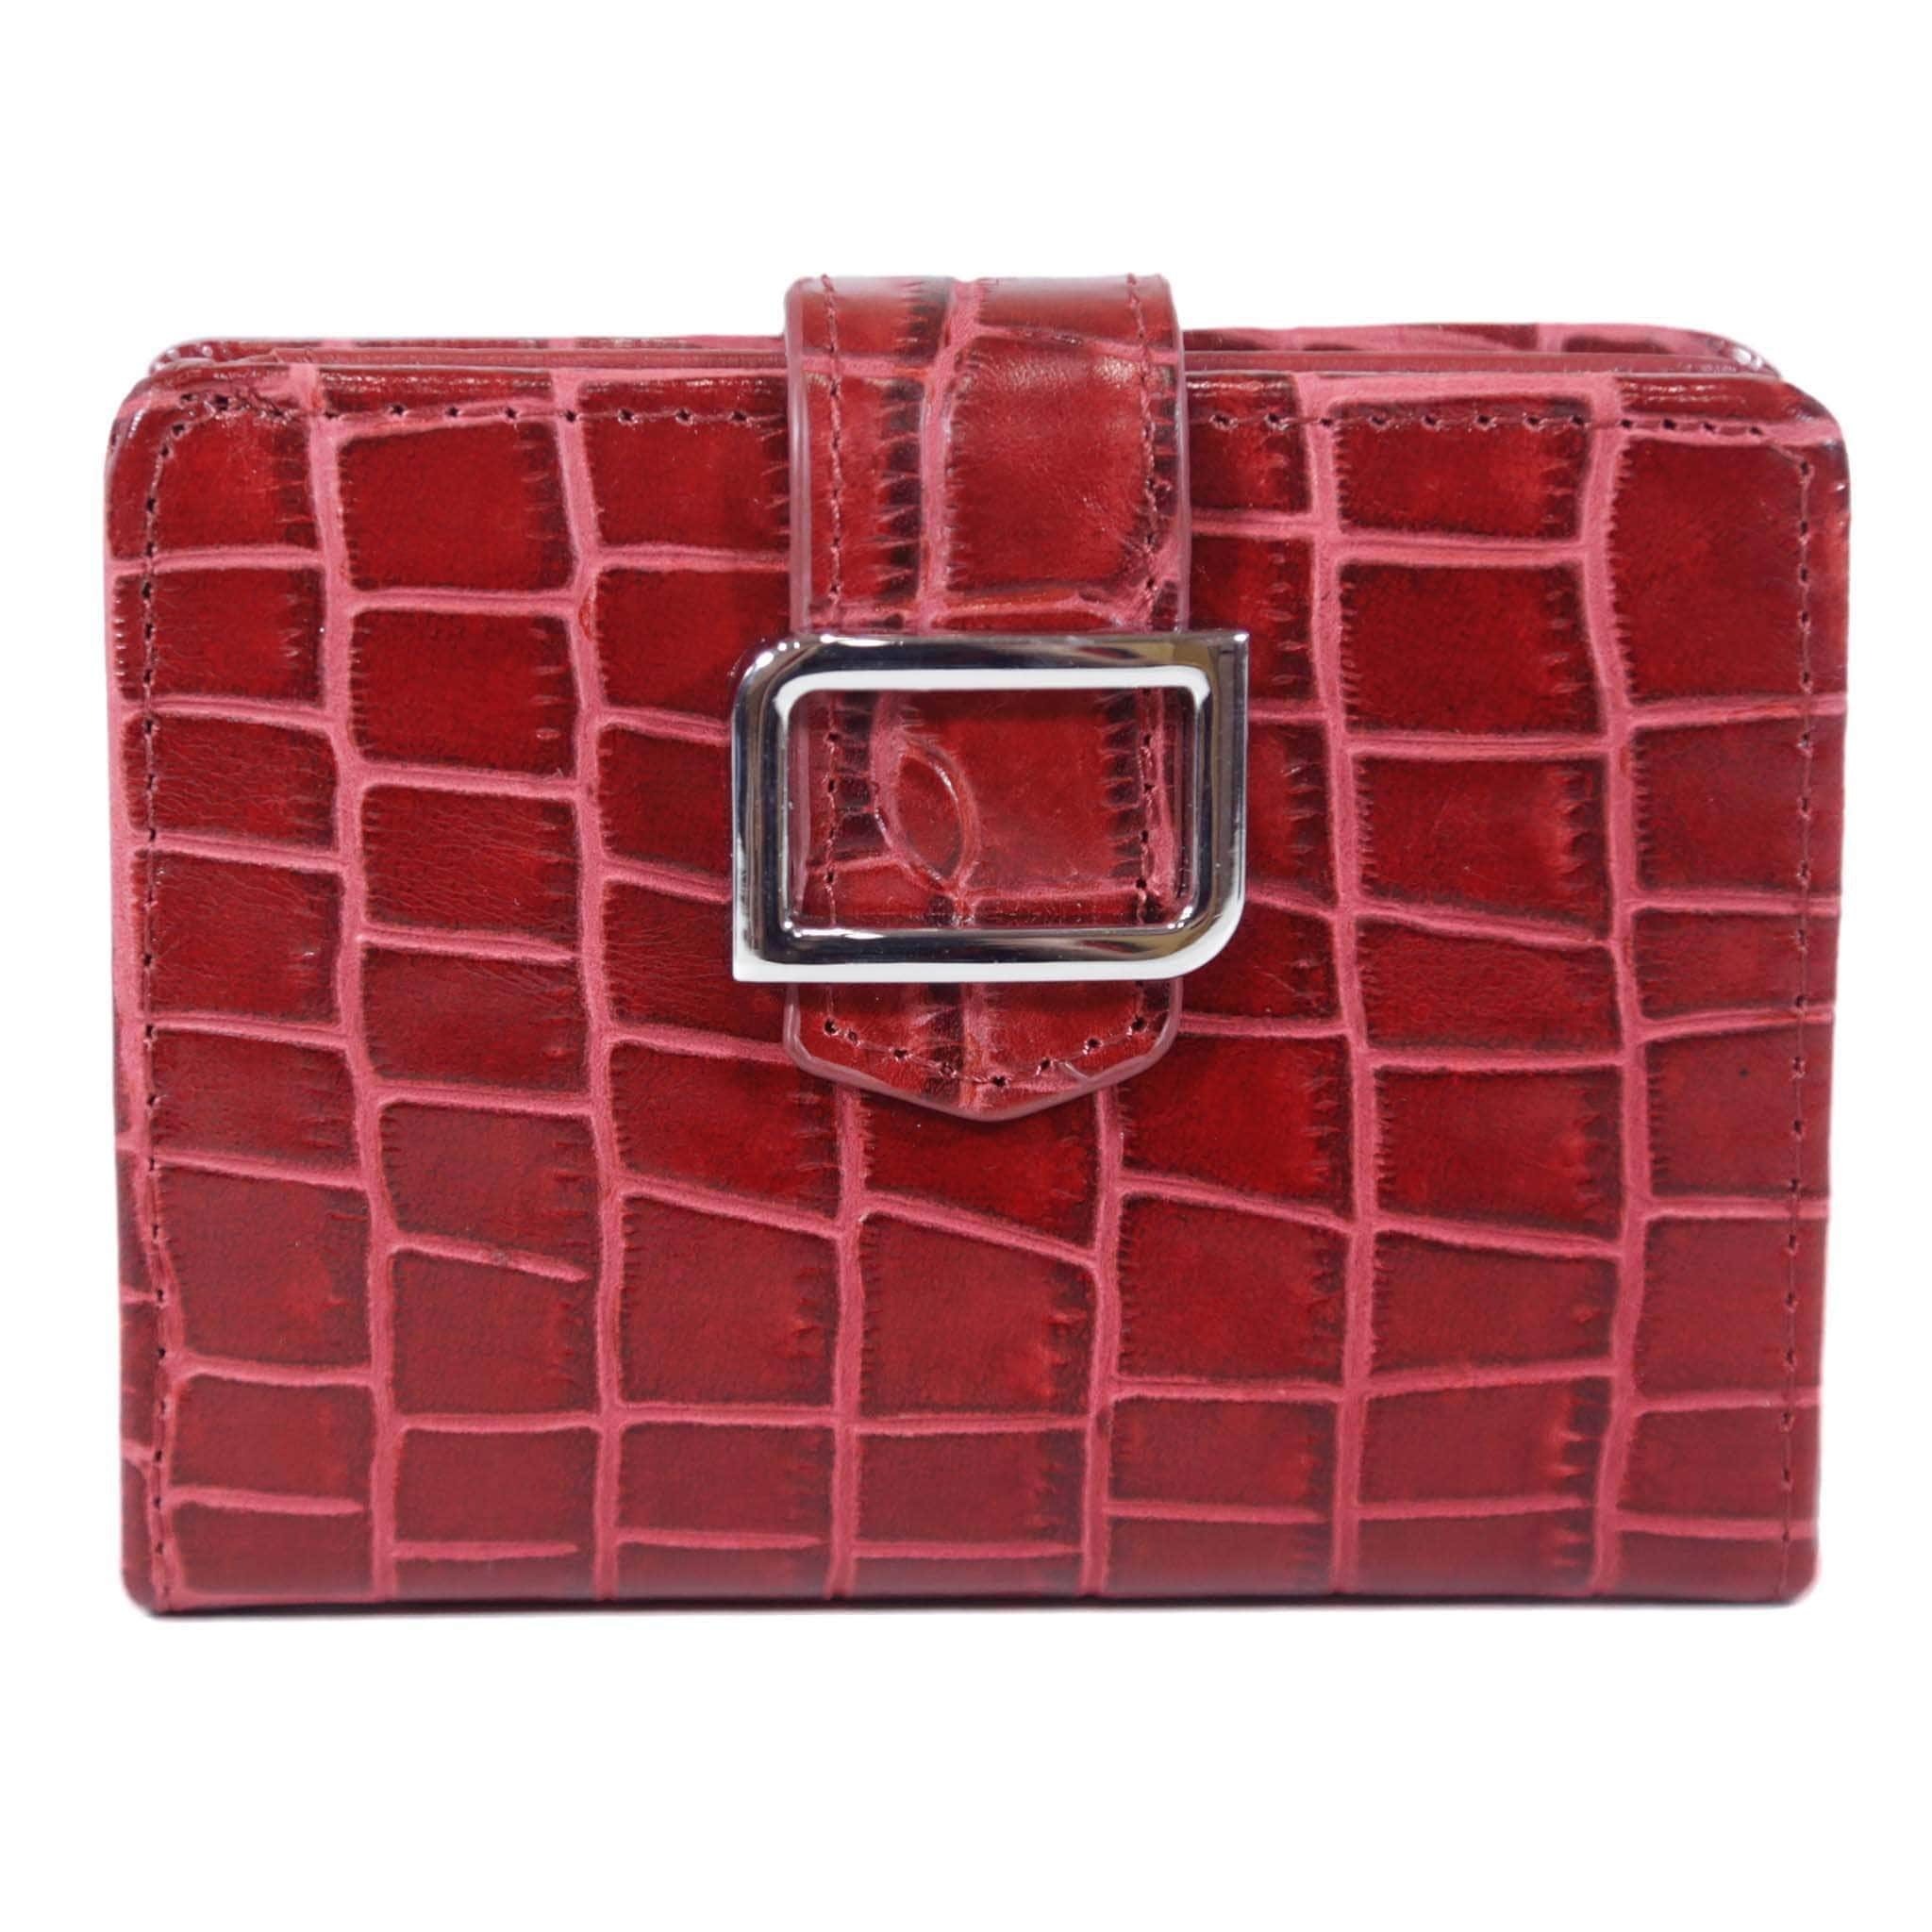 ID Stronghold Ladies Wallet Croco Red Croco Embossed Slim Women's Mini Trifold